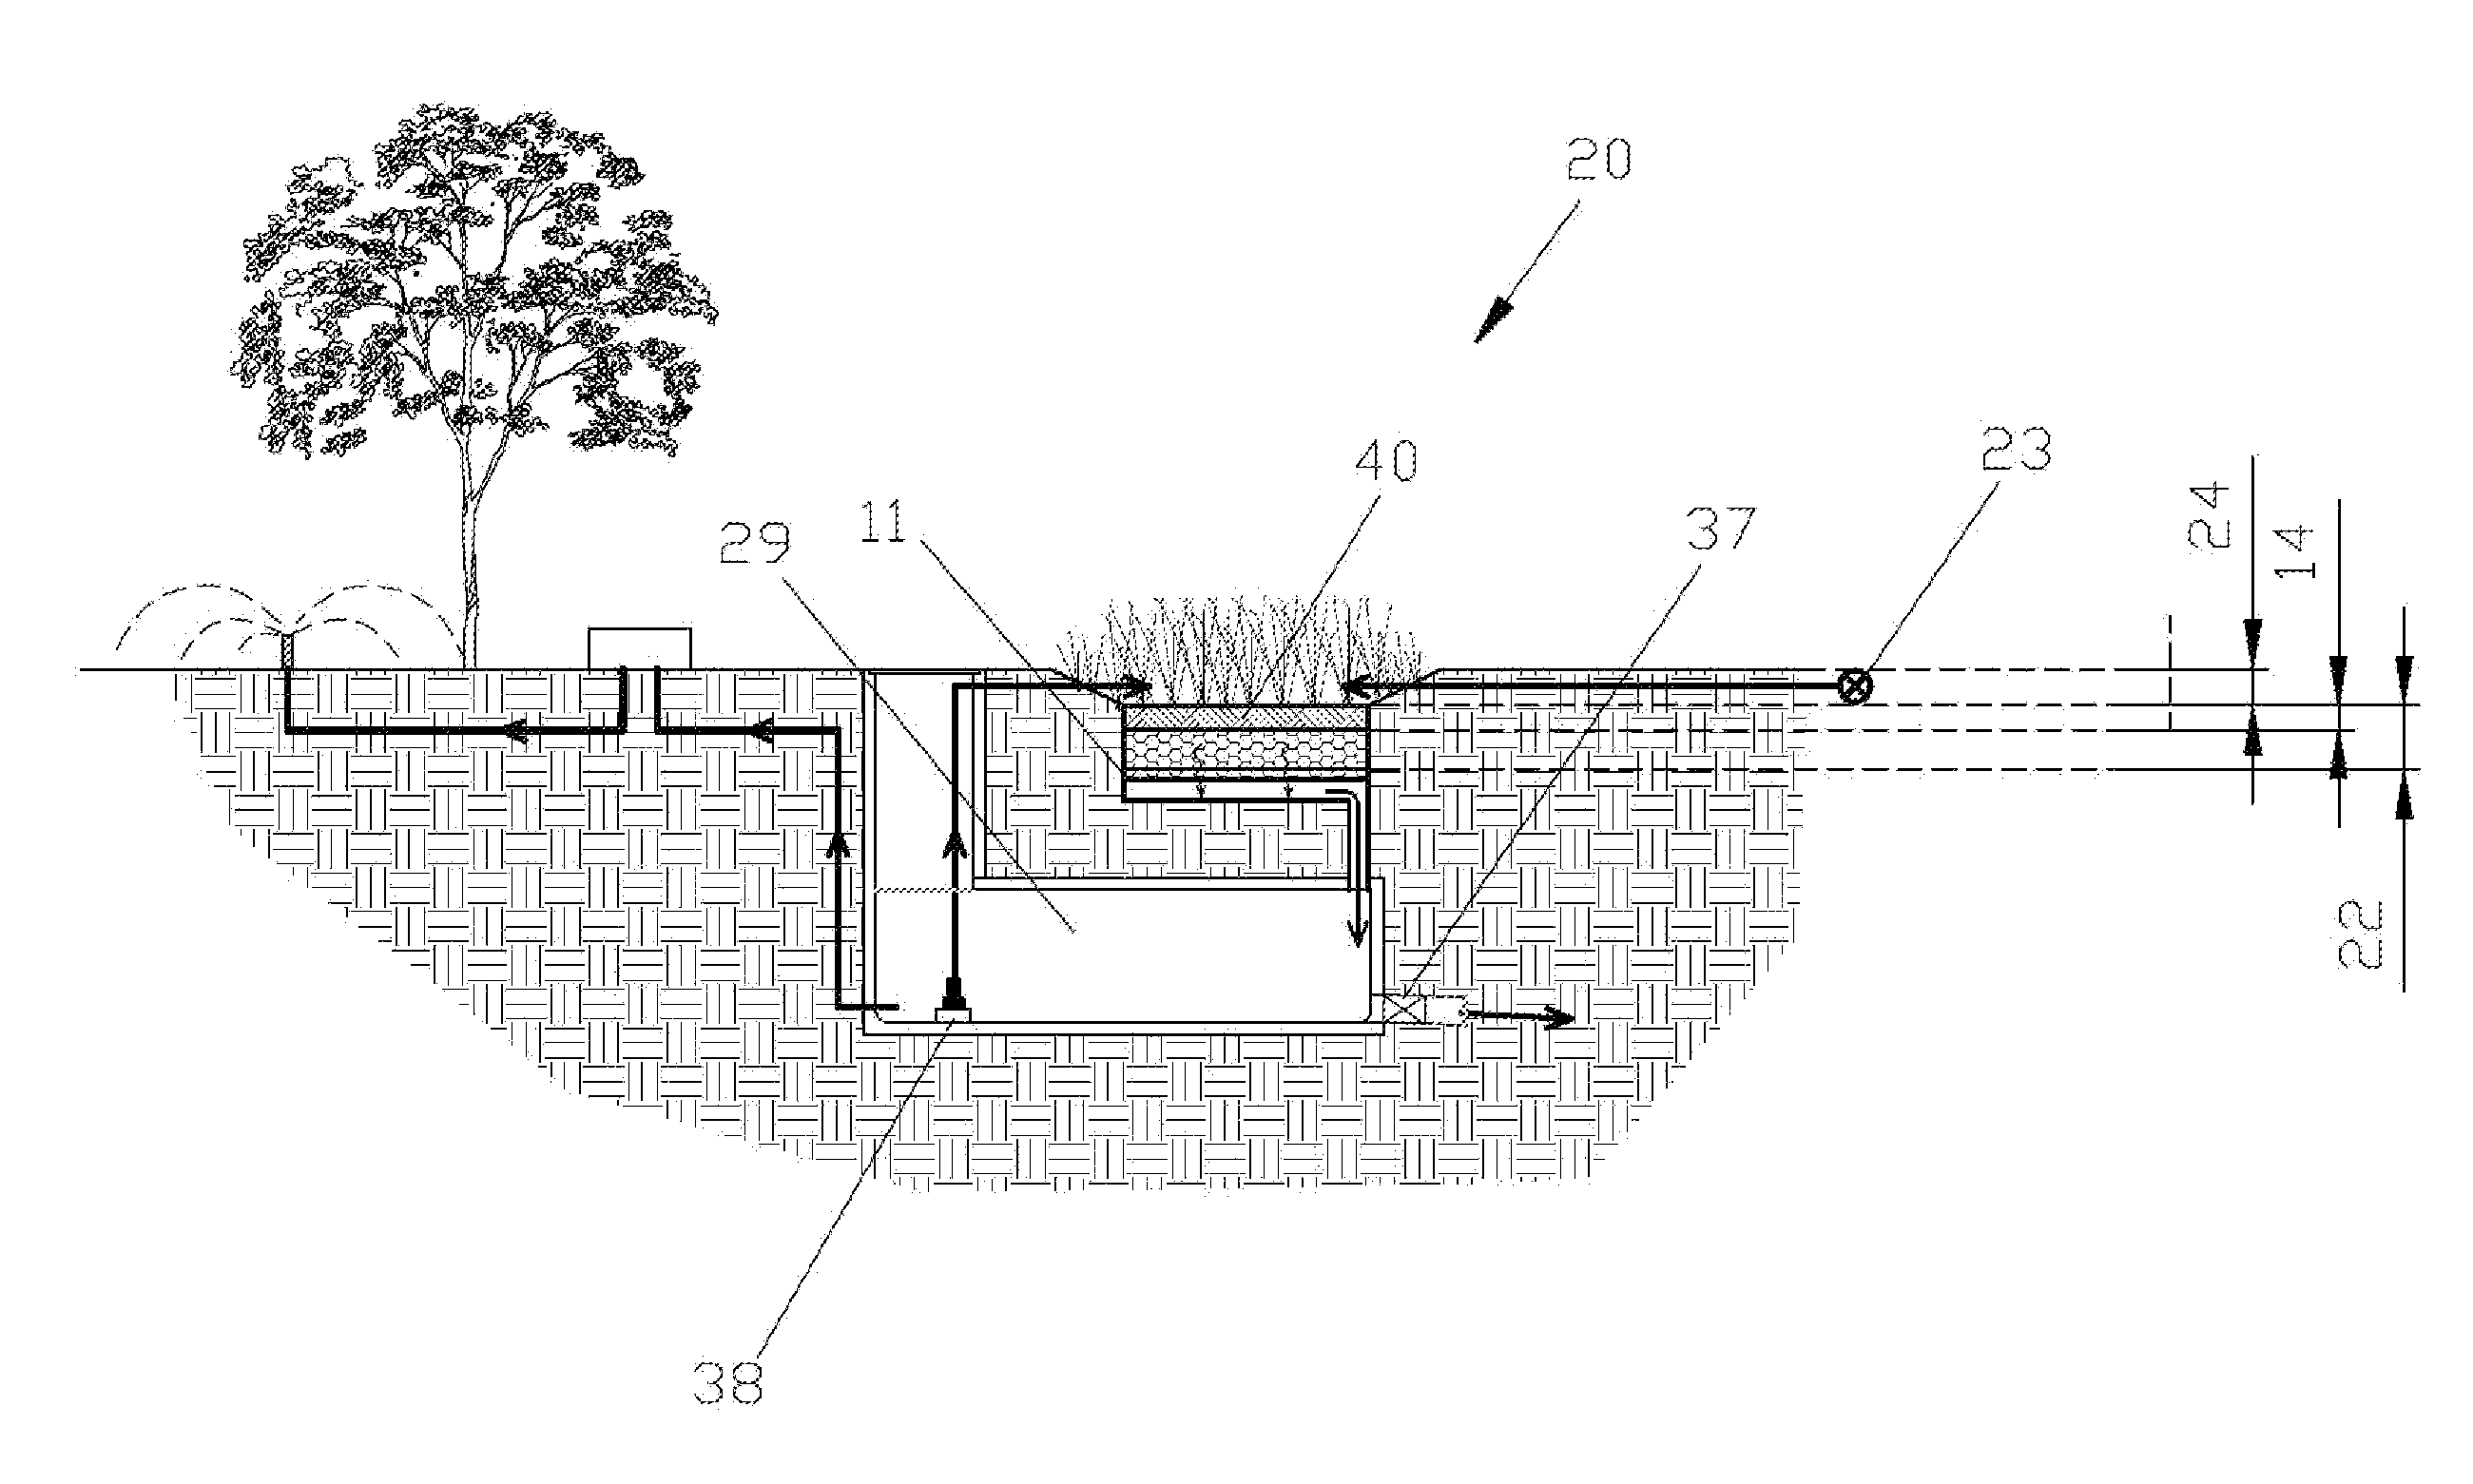 Bioretention module, method and system for treating water